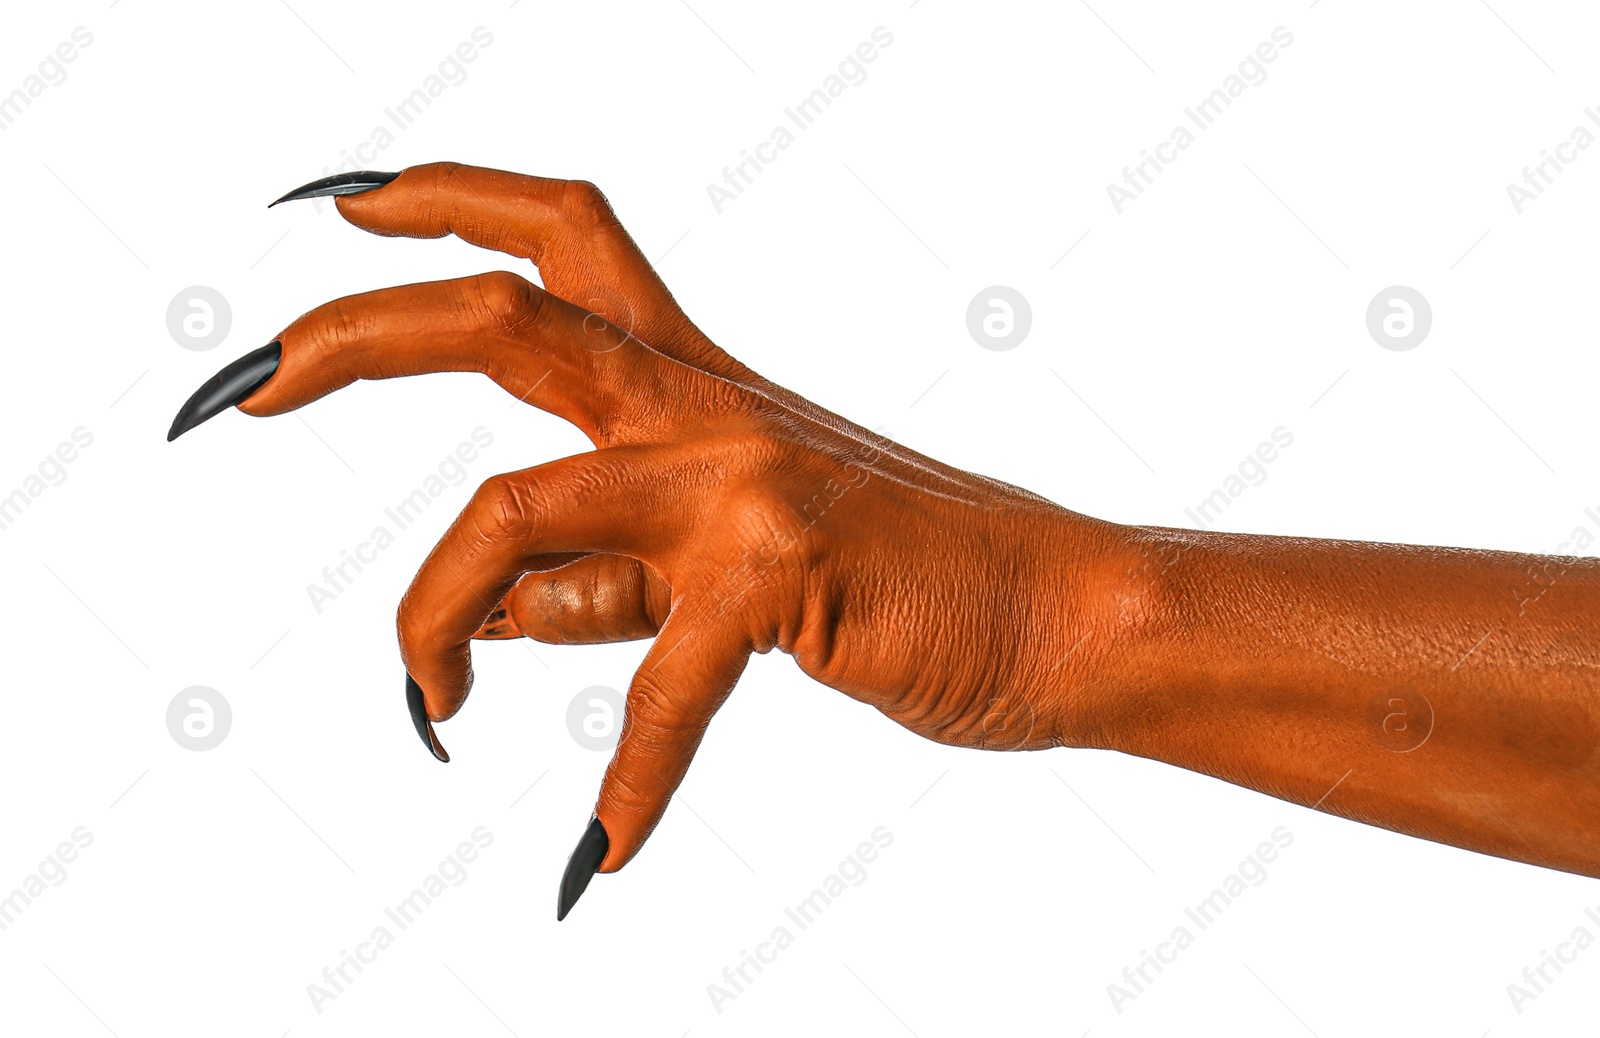 Image of Creepy monster. Orange hand with claws isolated on white